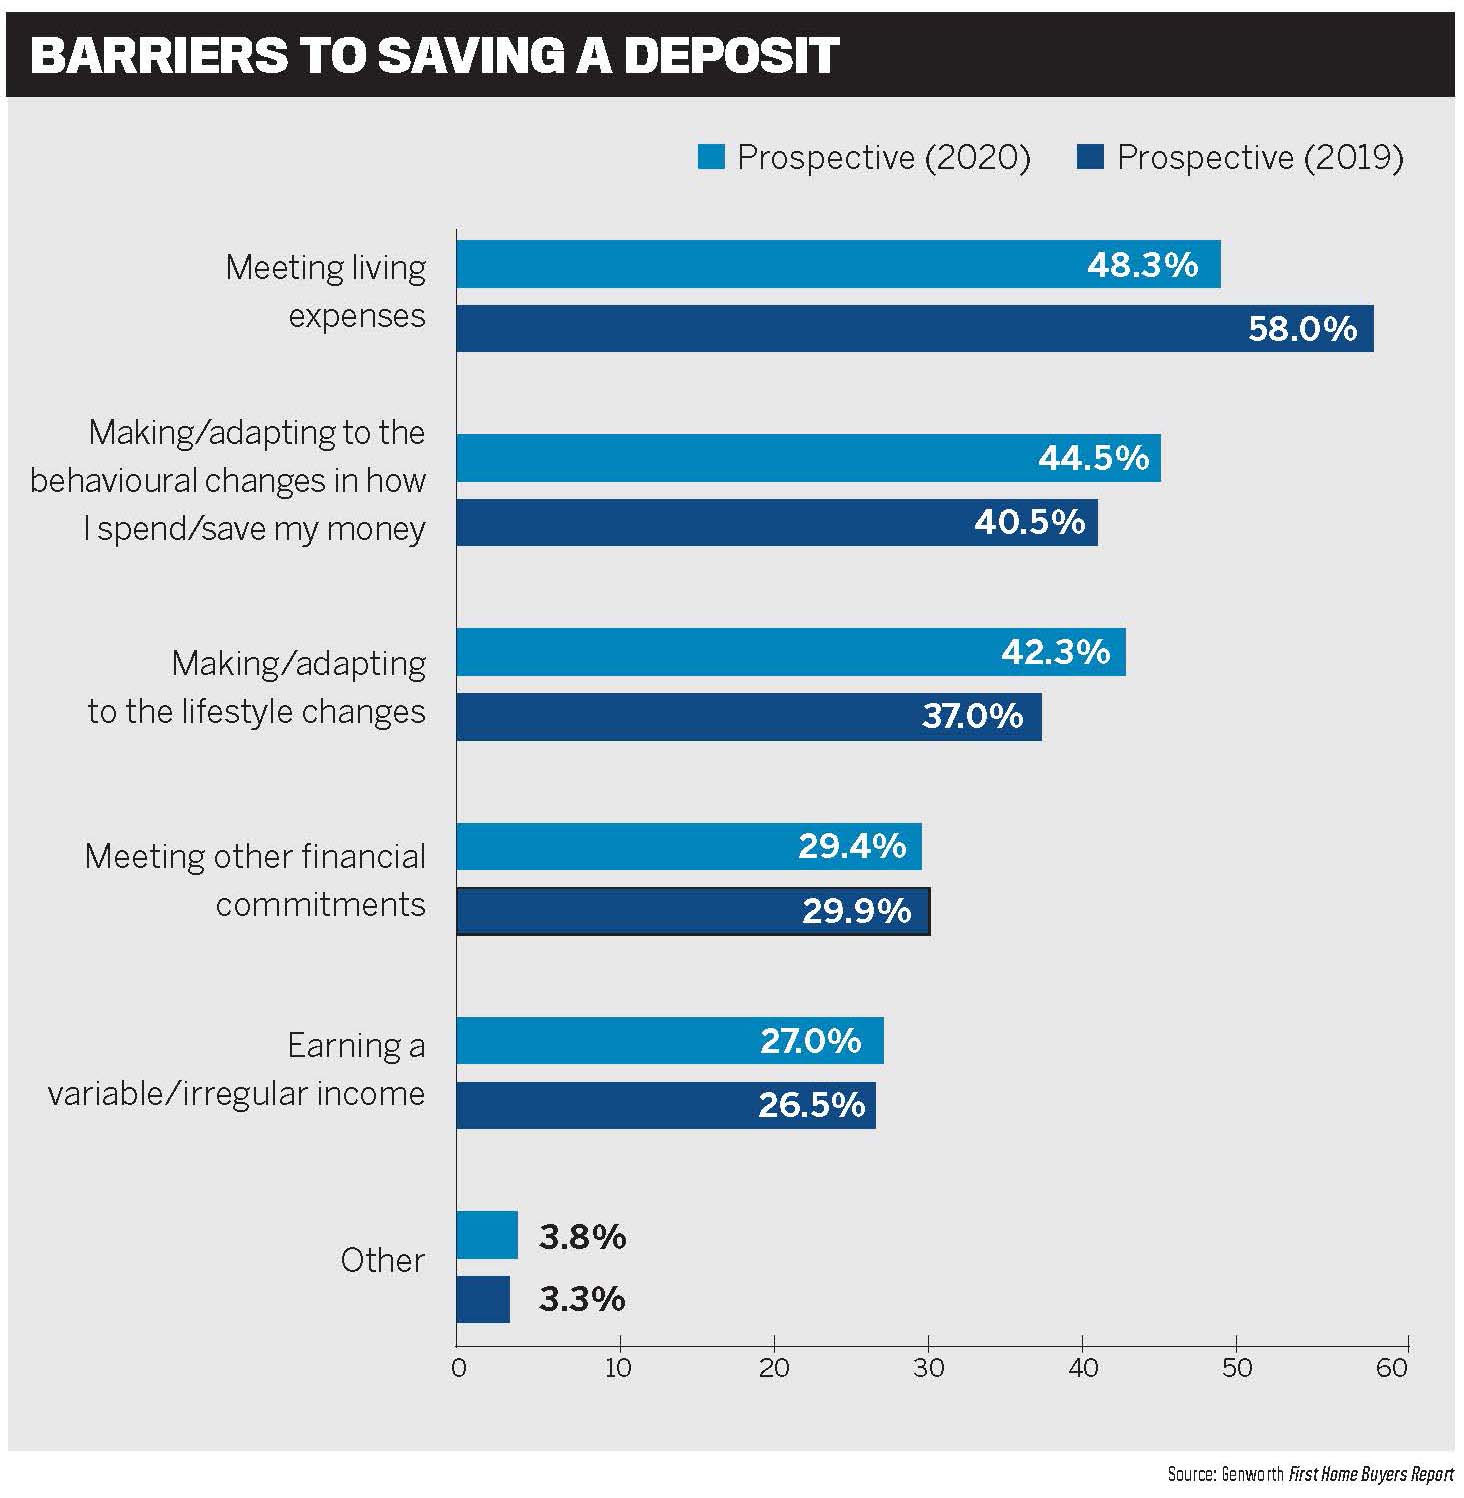 Barriers to saving a deposit